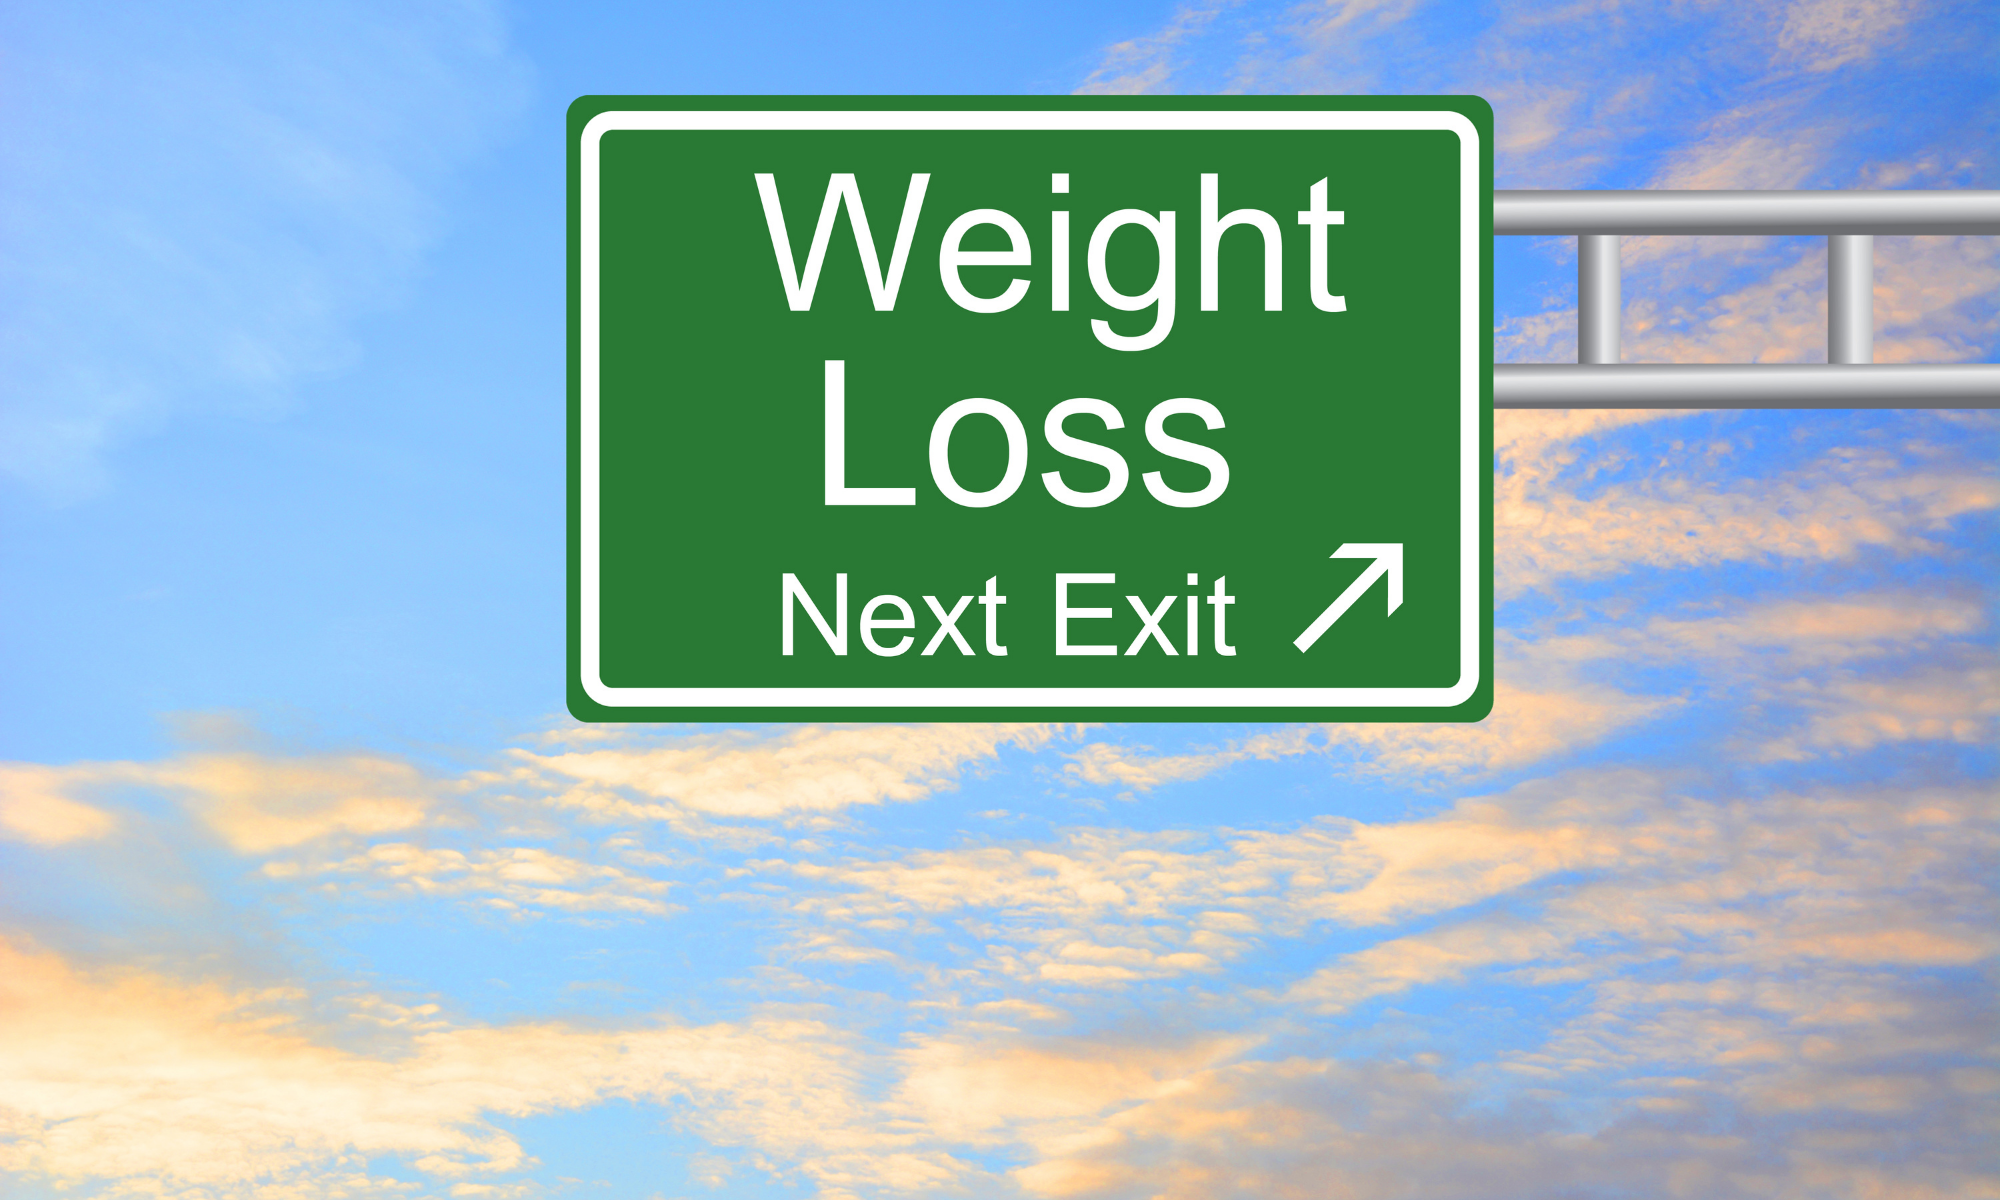 Road sign that says "Weight Loss Next Exit"